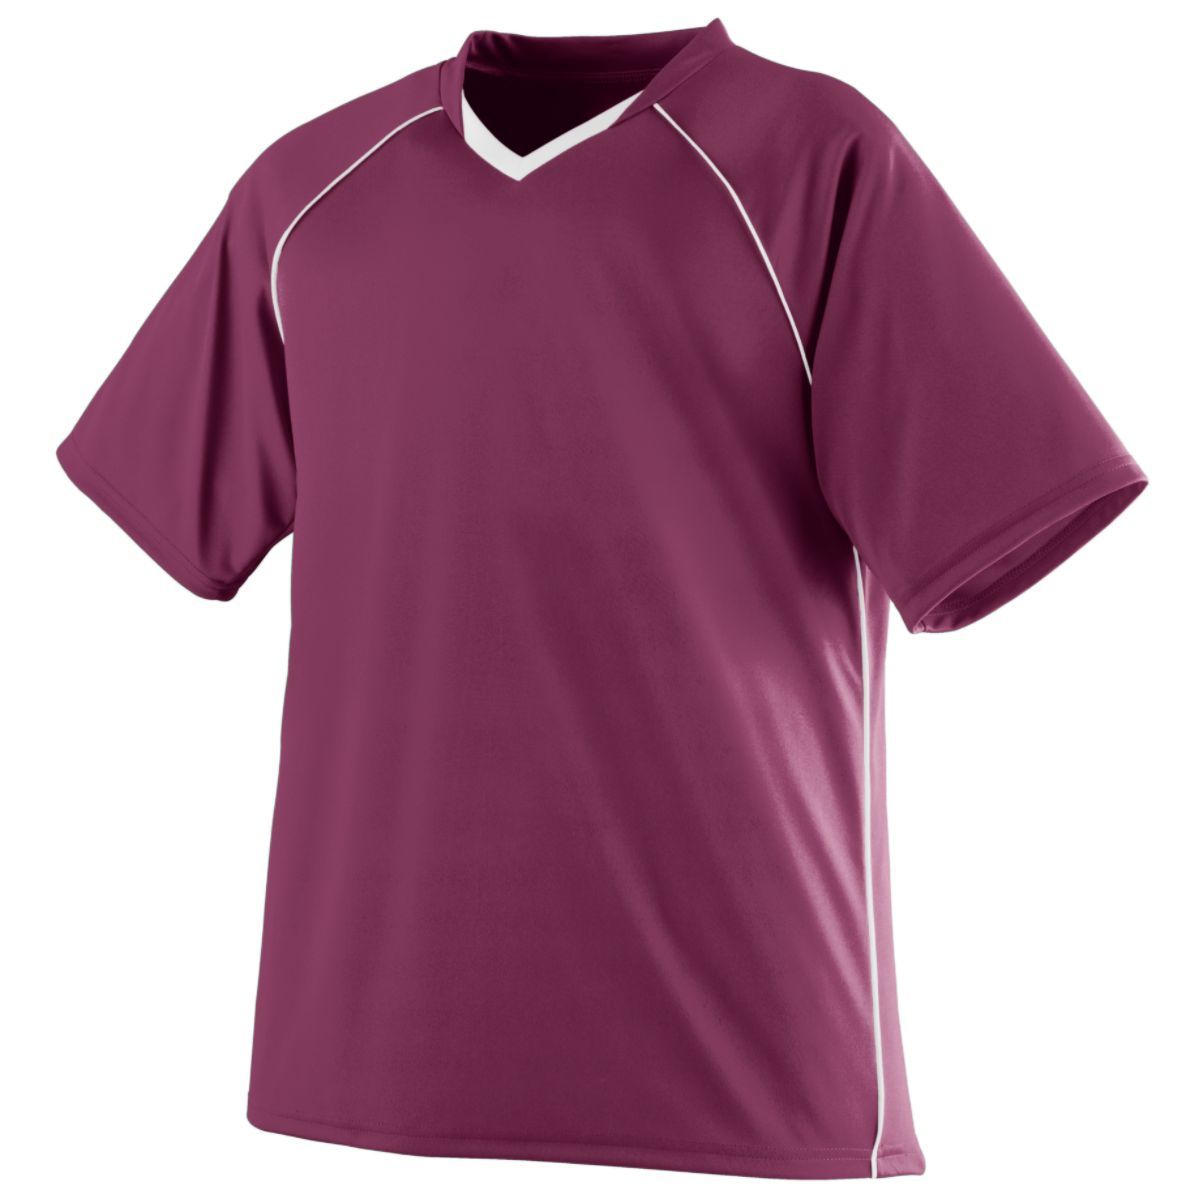 Augusta Sportswear Youth Striker Jersey in Maroon/White  -Part of the Youth, Youth-Jersey, Augusta-Products, Soccer, Shirts, All-Sports-1 product lines at KanaleyCreations.com